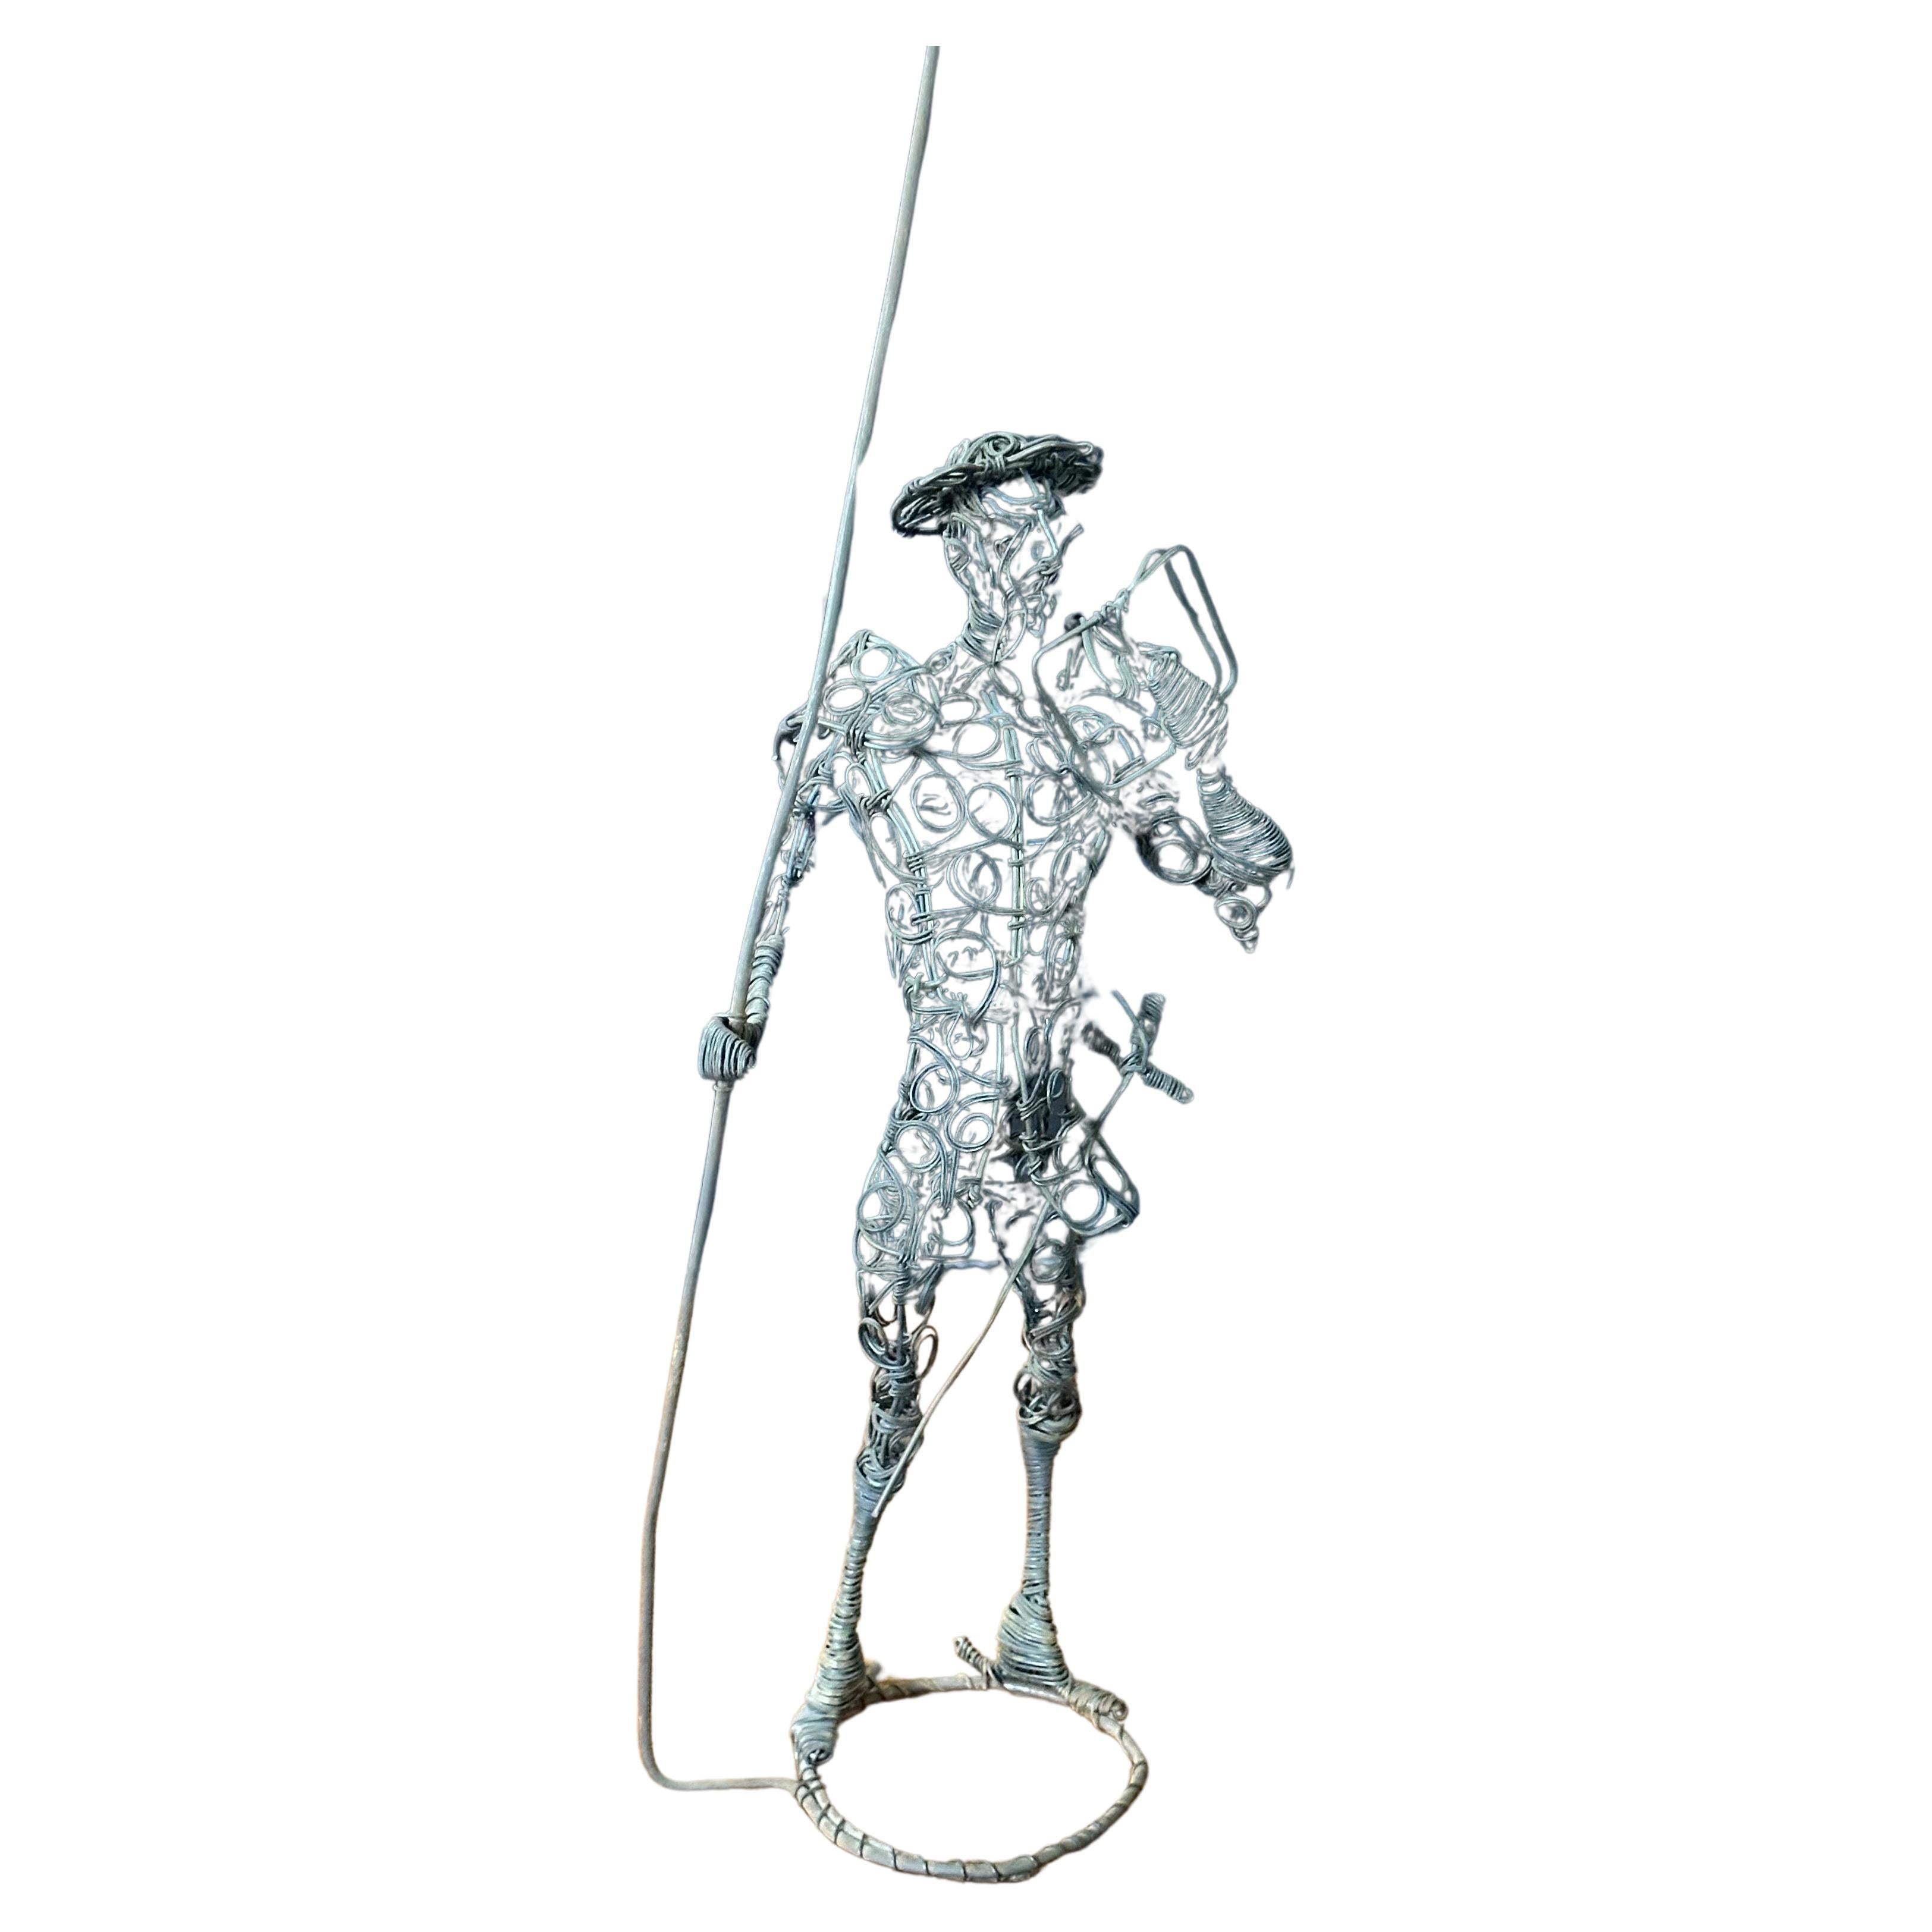 Vintage Don Quixote brutalist wire sculpture, circa 1970s. This handmade wire sculpture has a wonderful Brutalist look and would add a lot of character to any Don Quixote or 